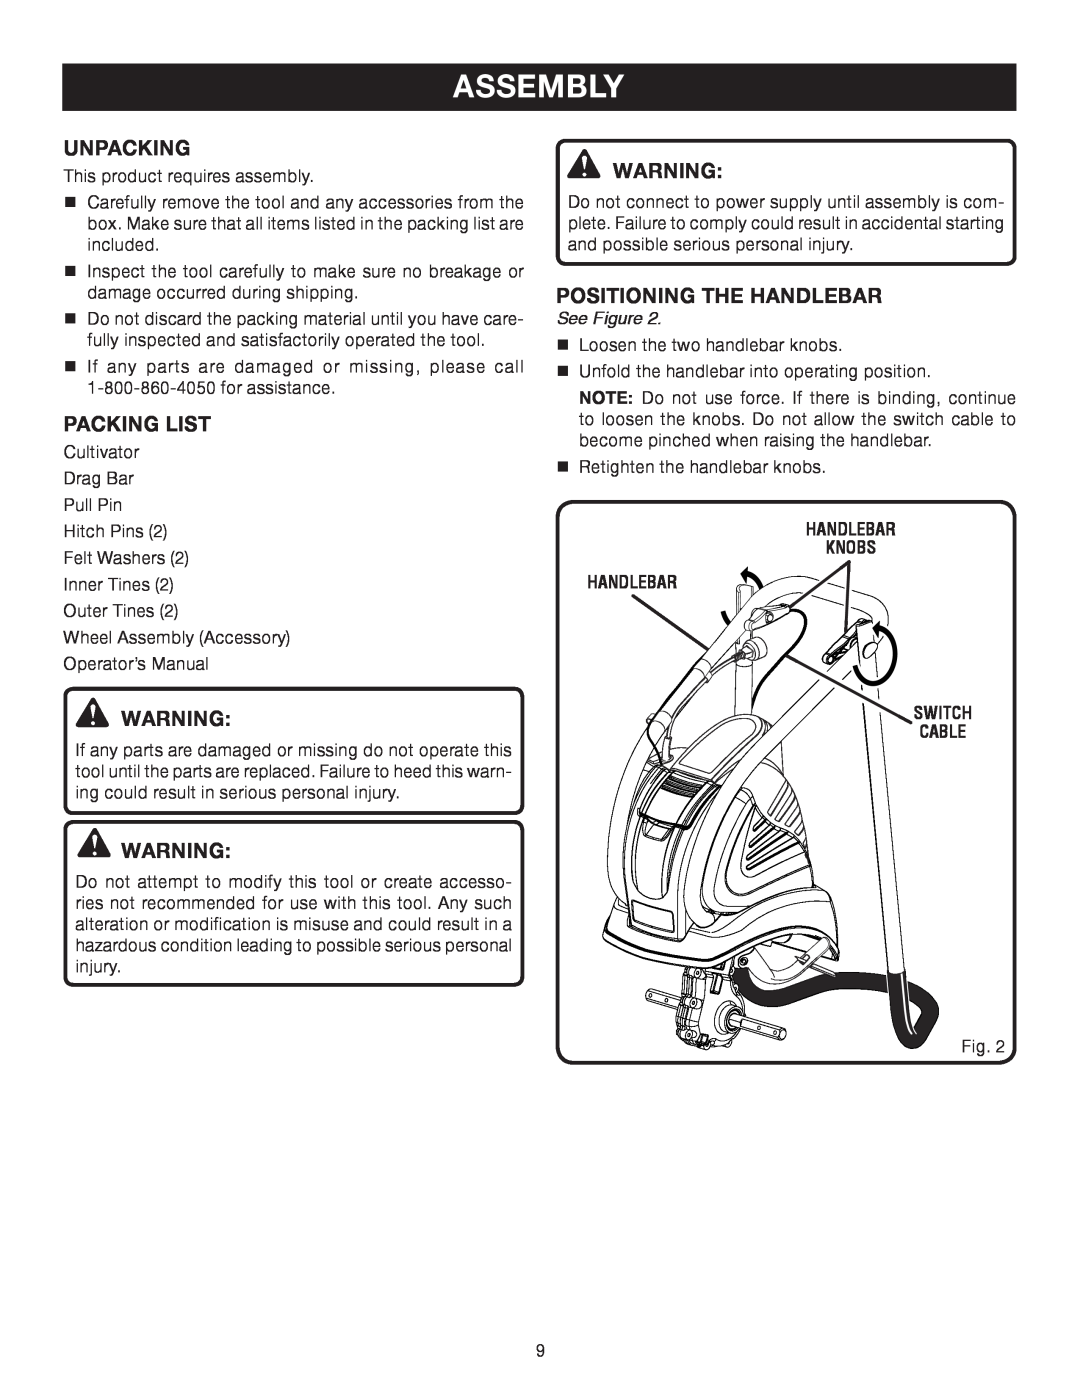 Ryobi Outdoor RY46501B manual Assembly, Unpacking, Packing List, Positioning The Handlebar, See Figure 